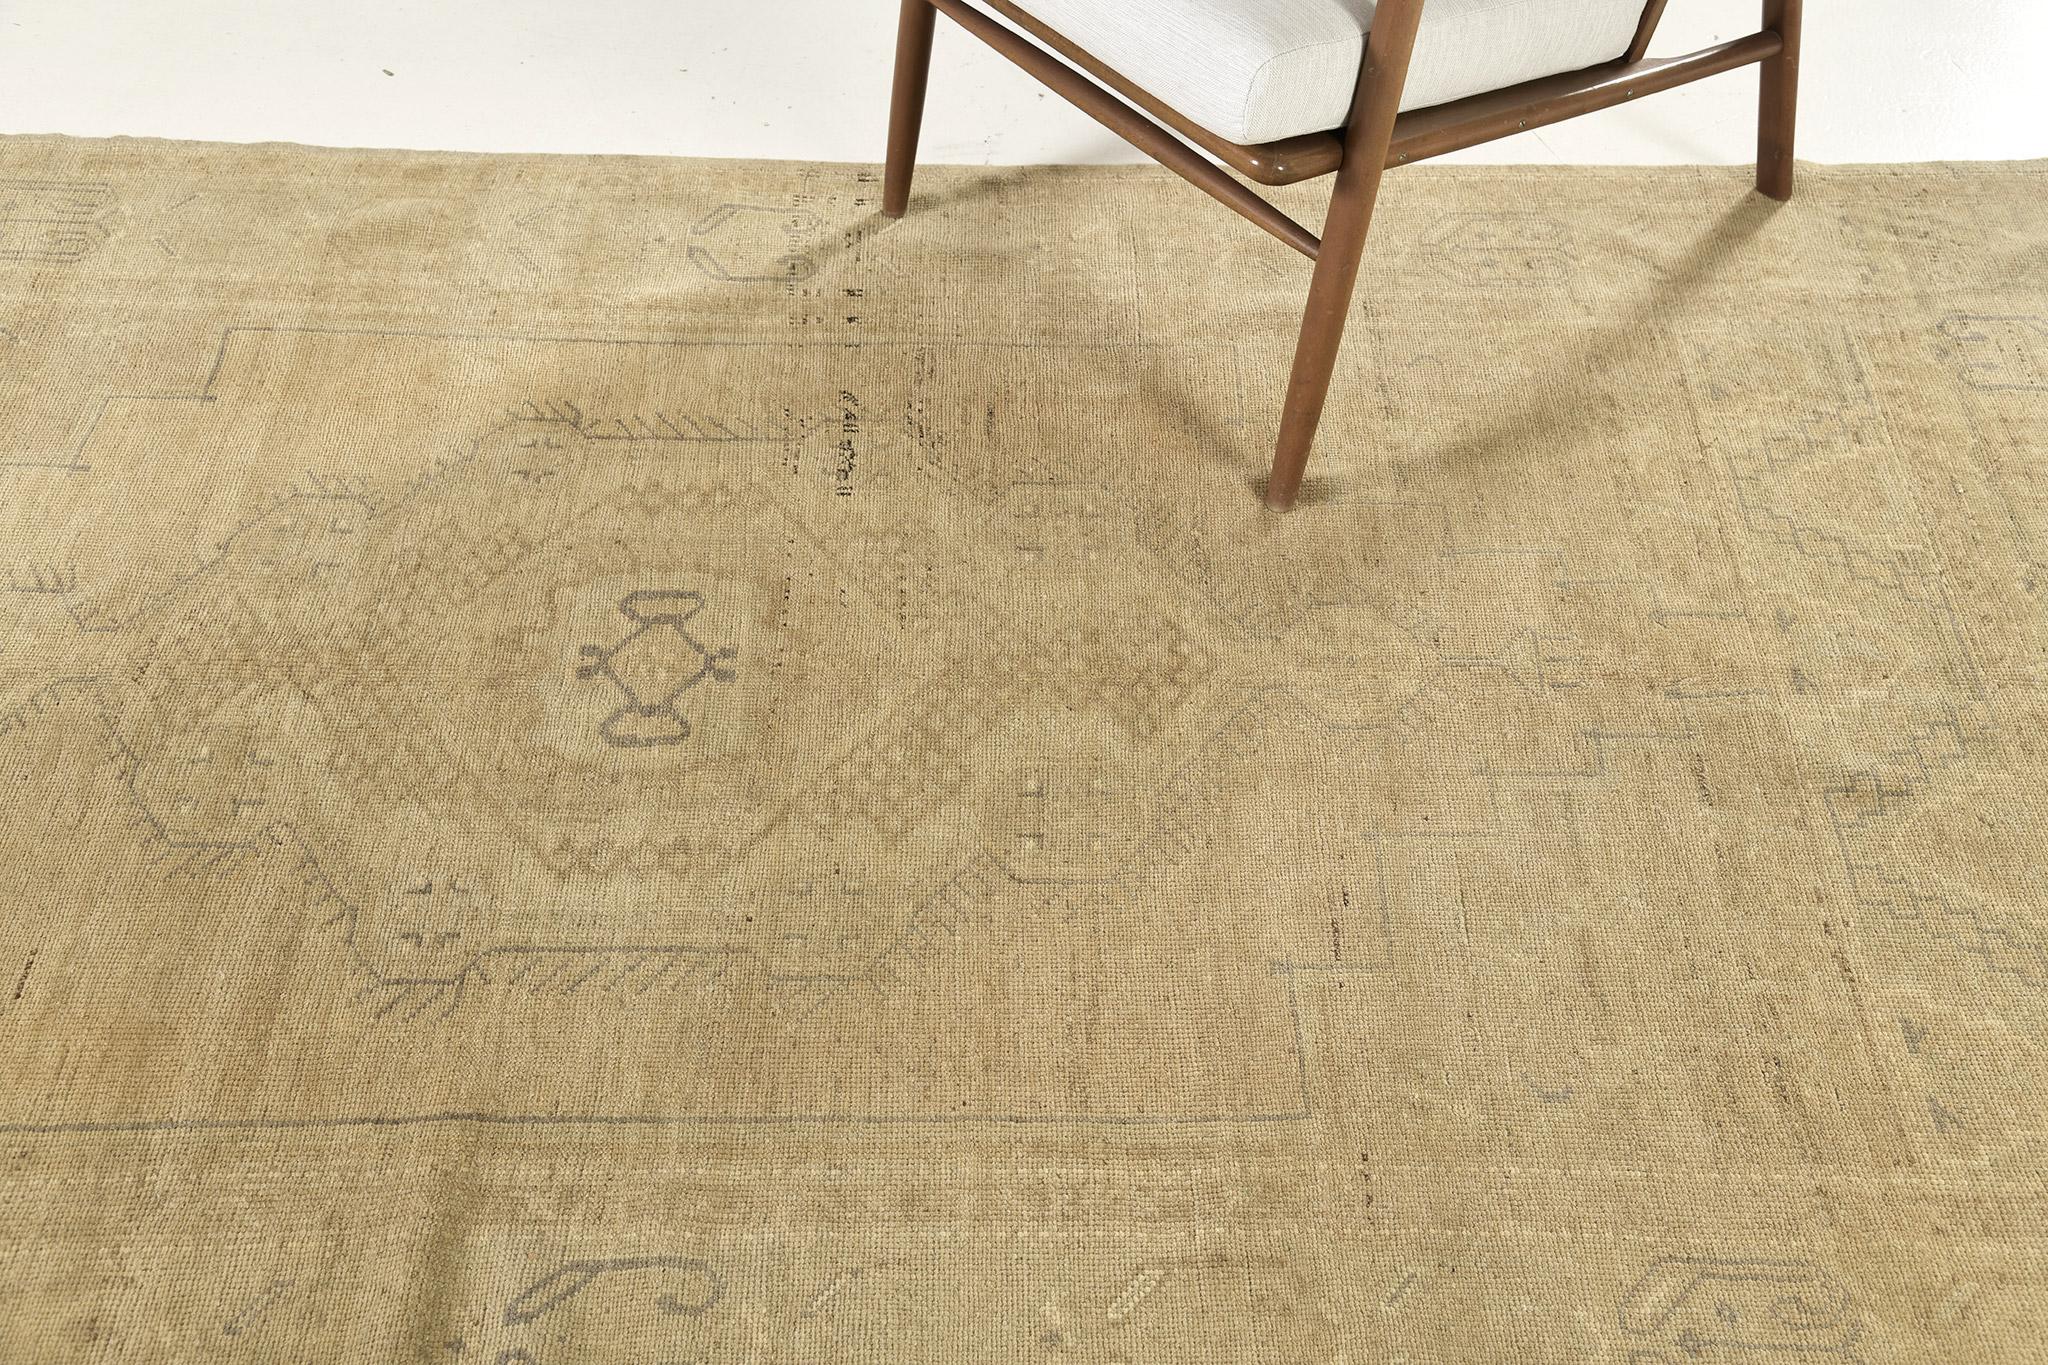 This phenomenal Turkish Anatolian Runner is perfect for your floors. It is not just for aesthetic value, but, to keep you on fashion as well. It features an array of stamp-neutral colors in vivid outlines. A beautiful hand-woven pile that each